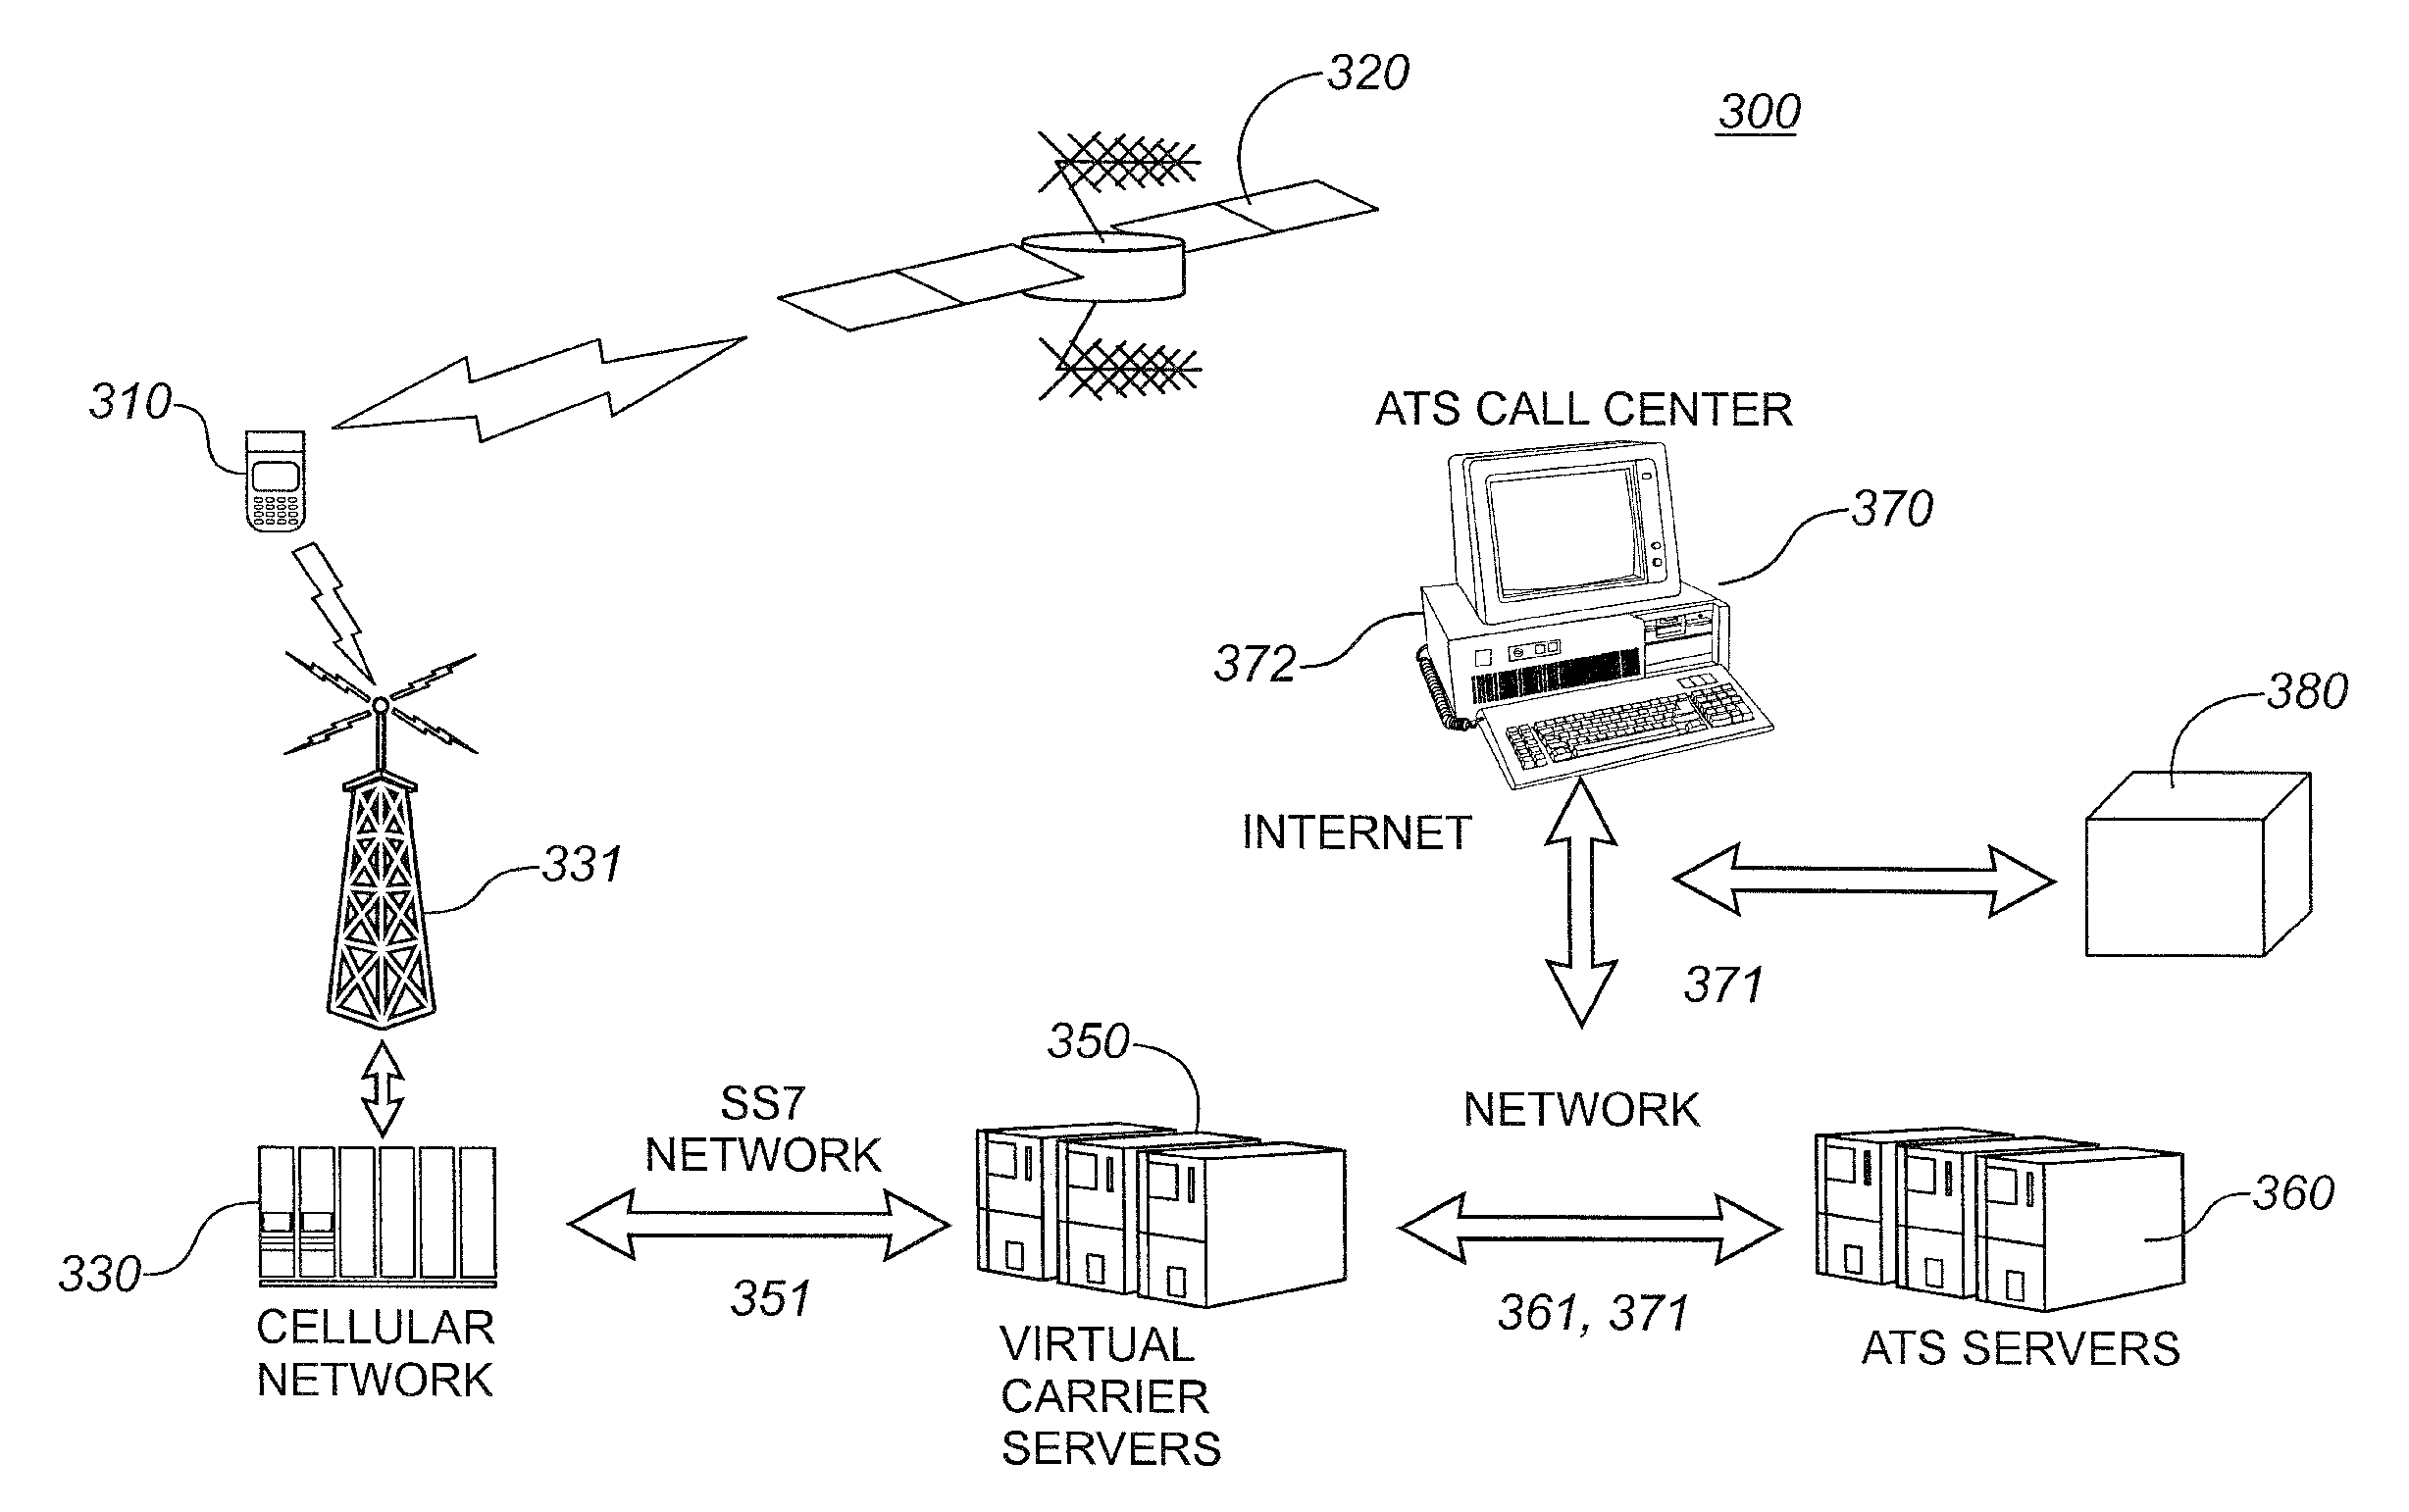 Method of configuring a tracking device